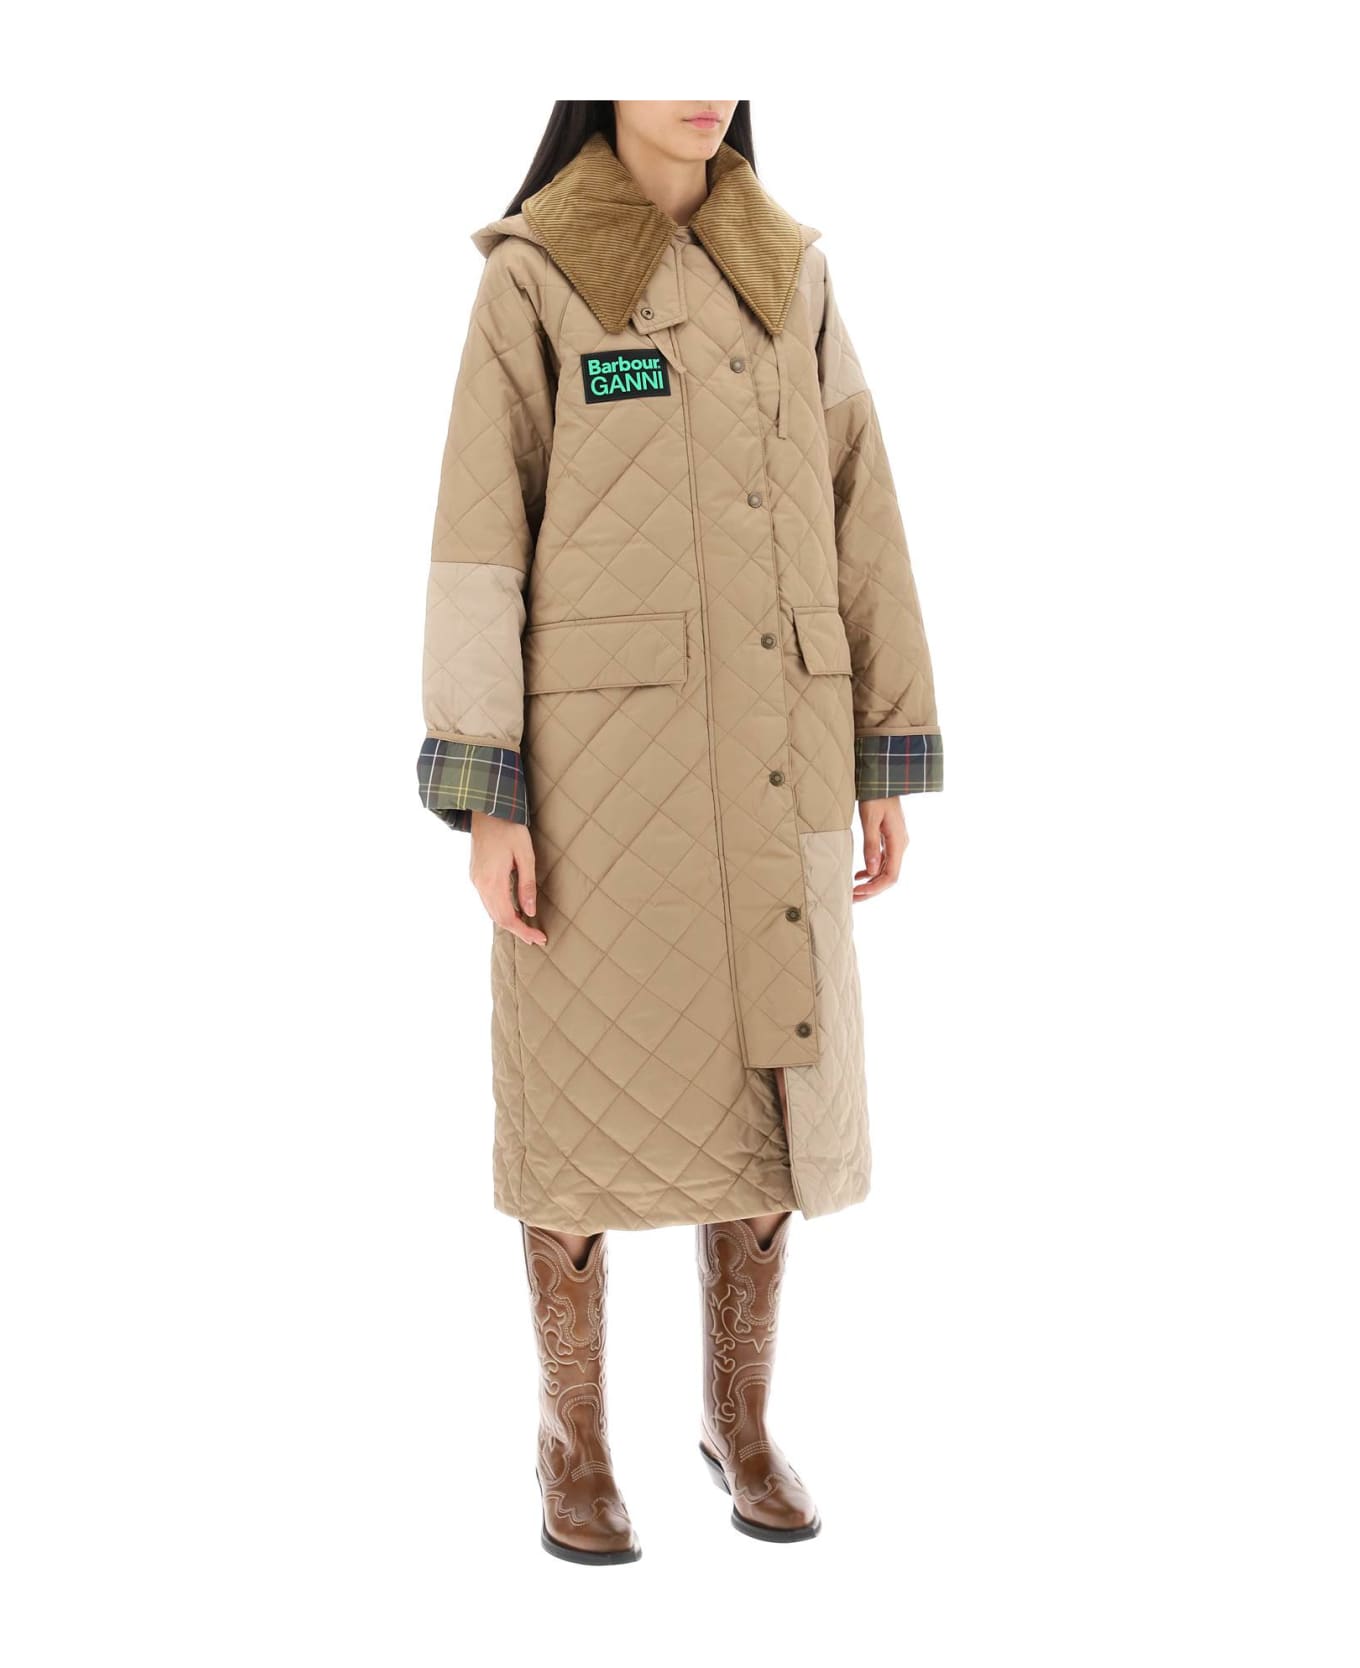 Barbour Burghley Quilted Trench Coat - HONEY LT TRENCH CLASSIC (Beige)